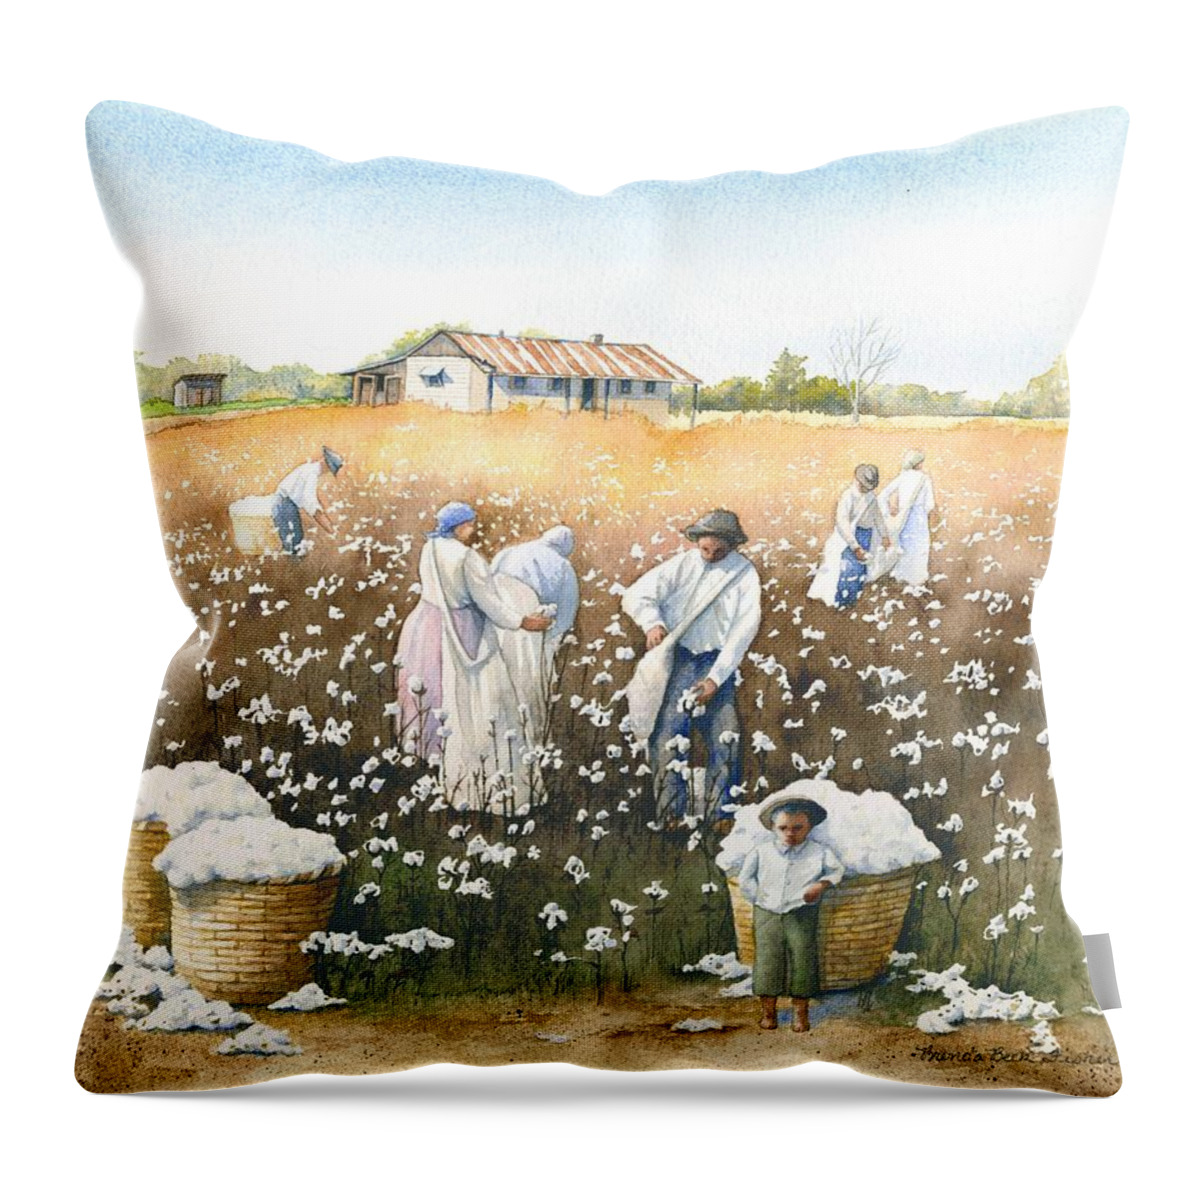 Cotton Throw Pillow featuring the painting I Wish It Were Snow by Brenda Beck Fisher